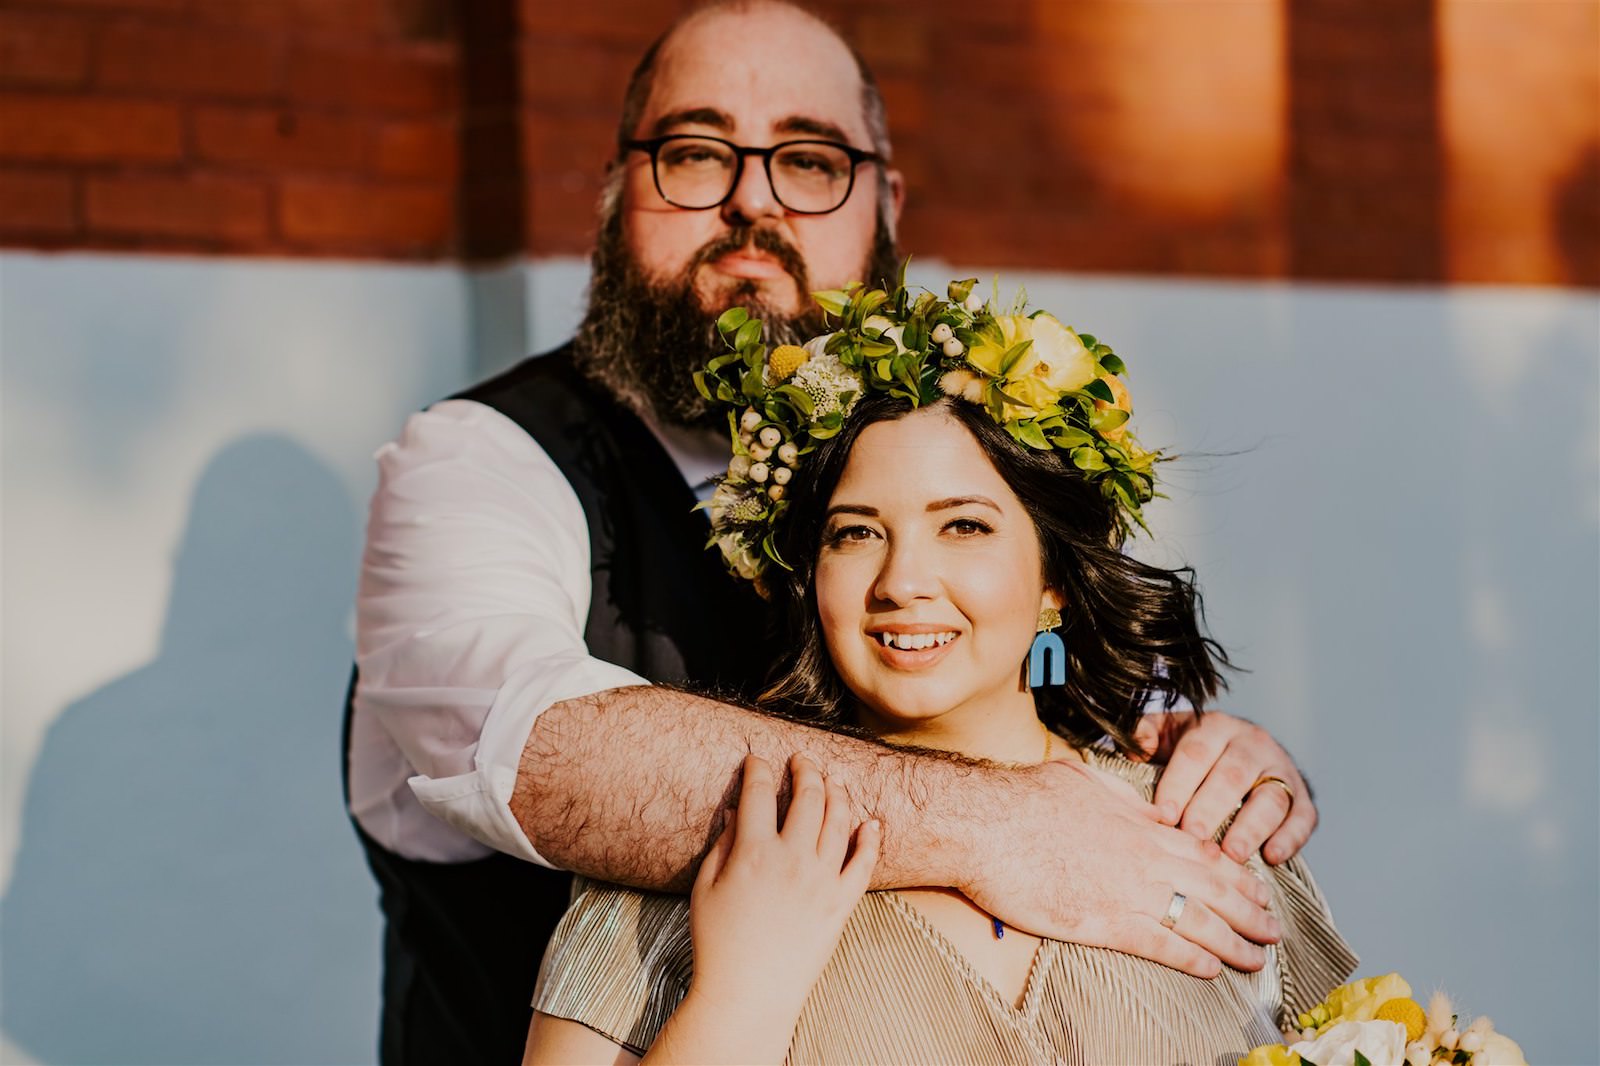 Intimate Bride and Groom Hug Capture | Florida Wedding Photographer Regina as the Photographer | Wedding Floral Headband by Tampa Florist Cotton & Magnolia | Hair and Makeup Artist Faces by Carly